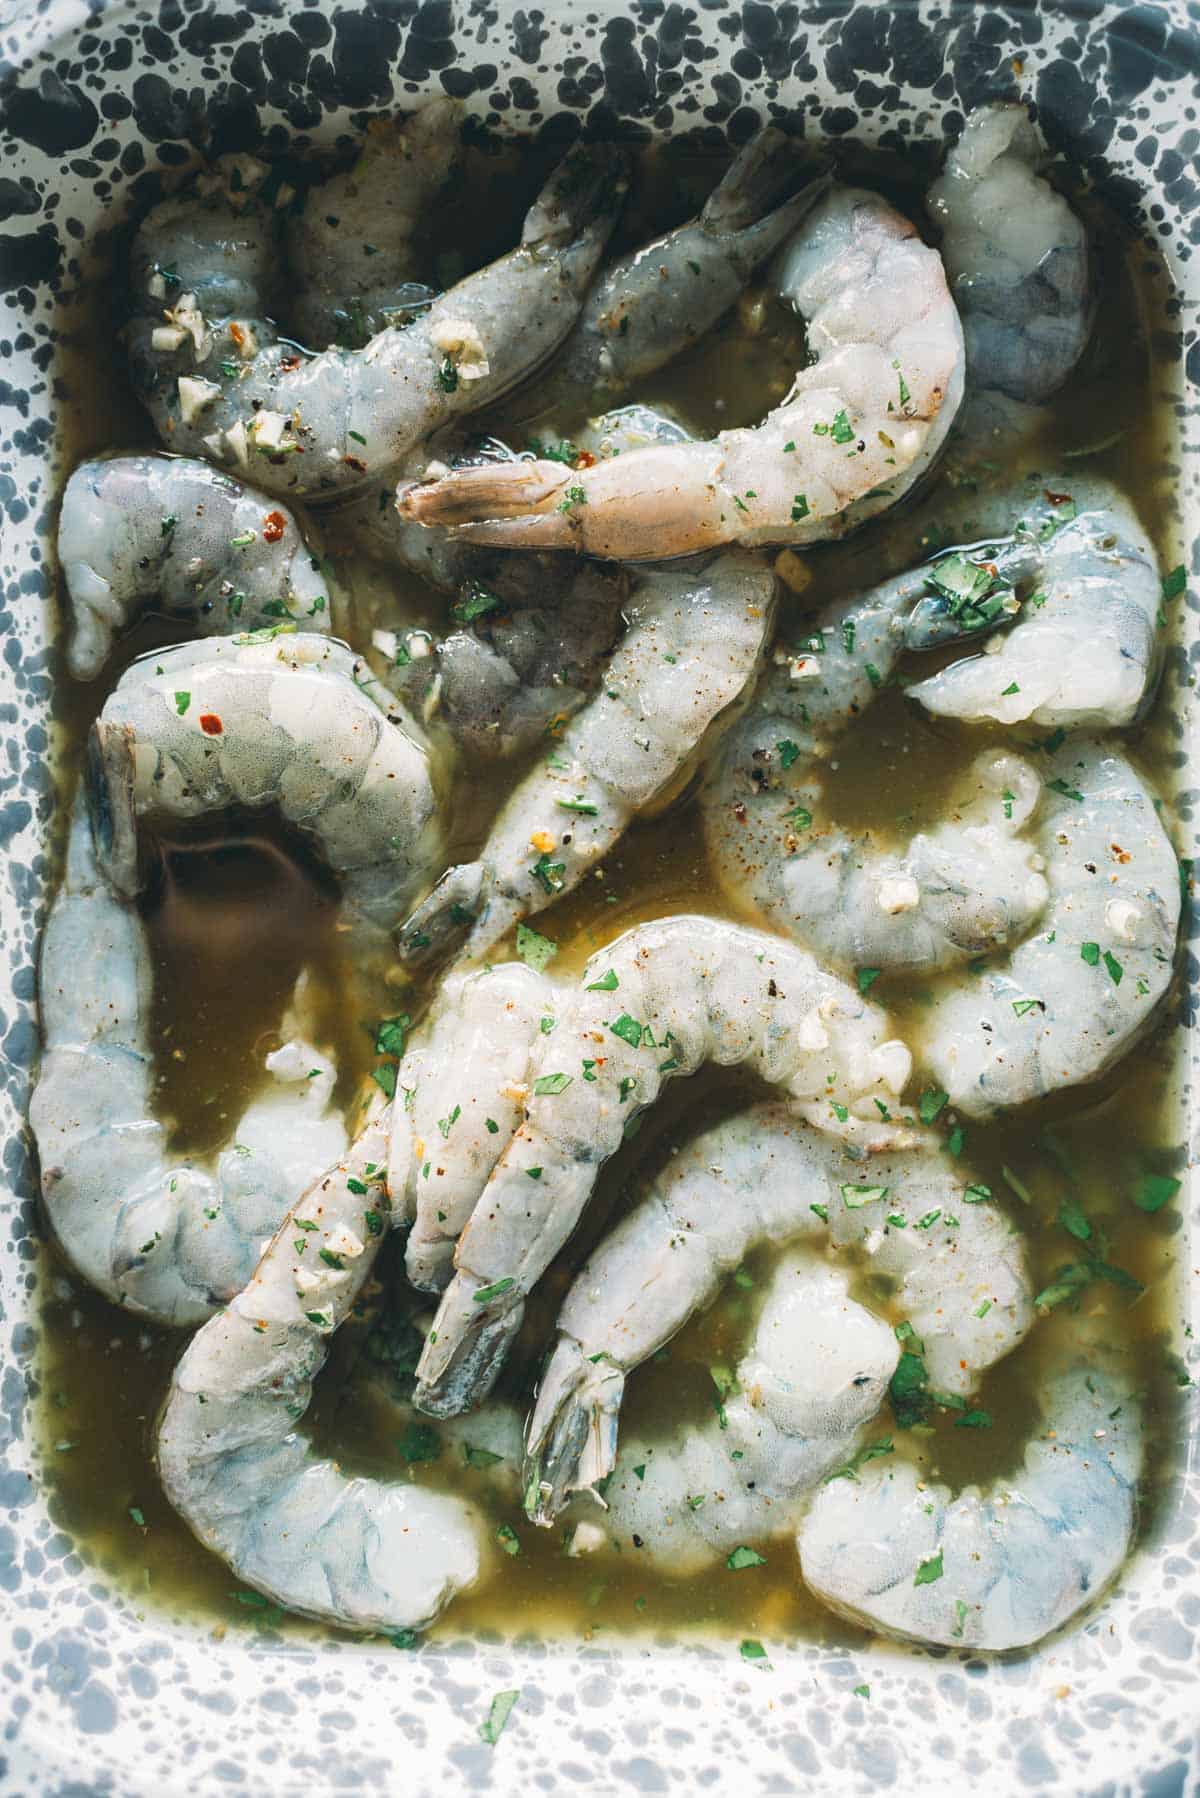 Uncooked shrimp marinating within a speckled ceramic dish.